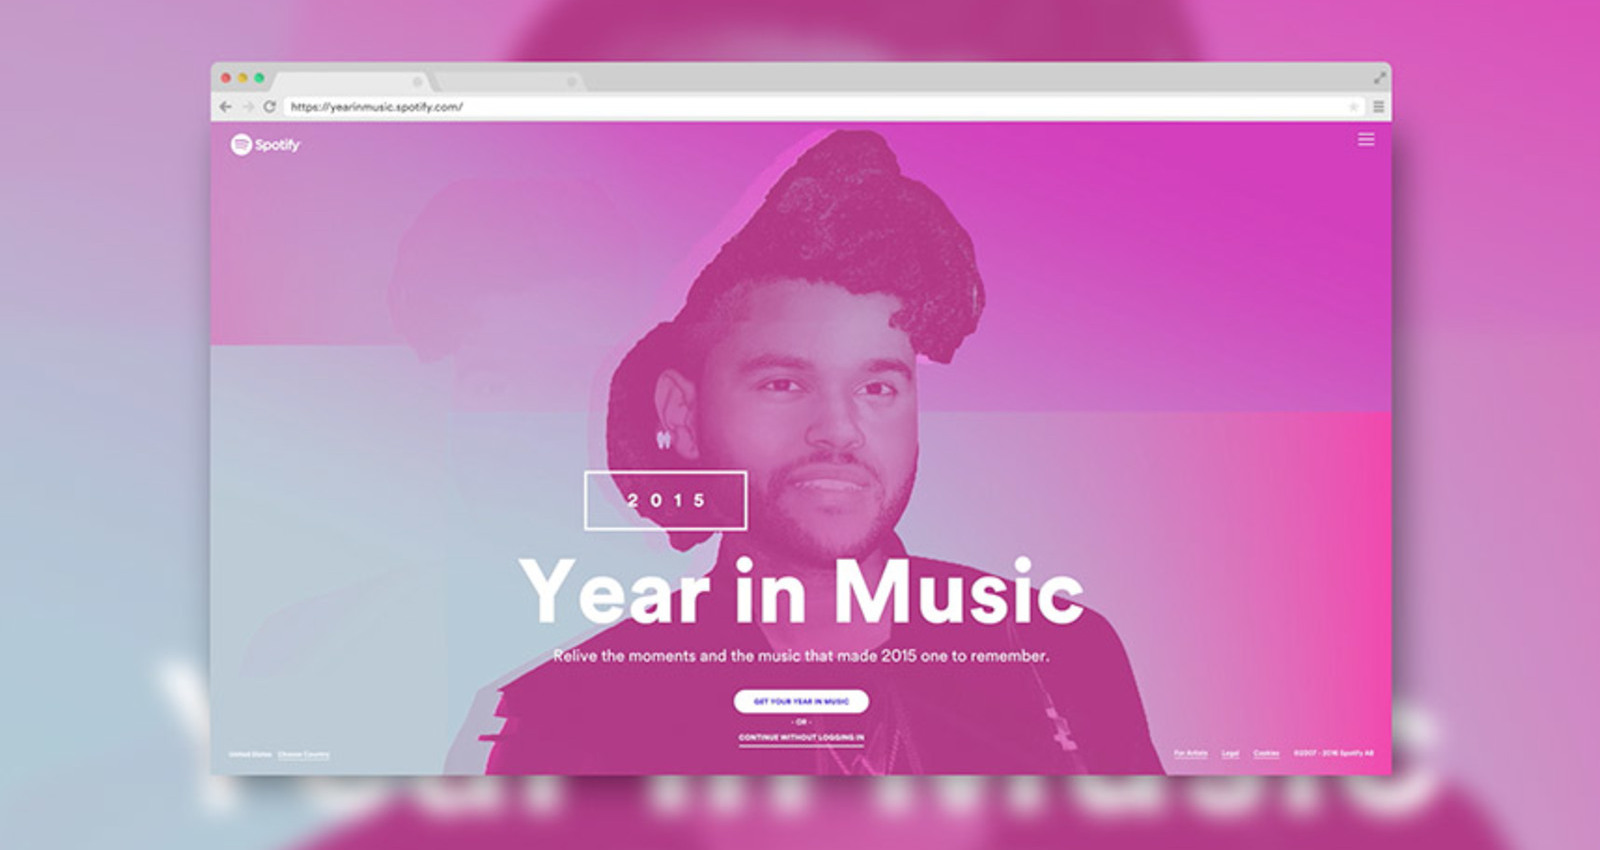 Spotify - Year in Music 2015